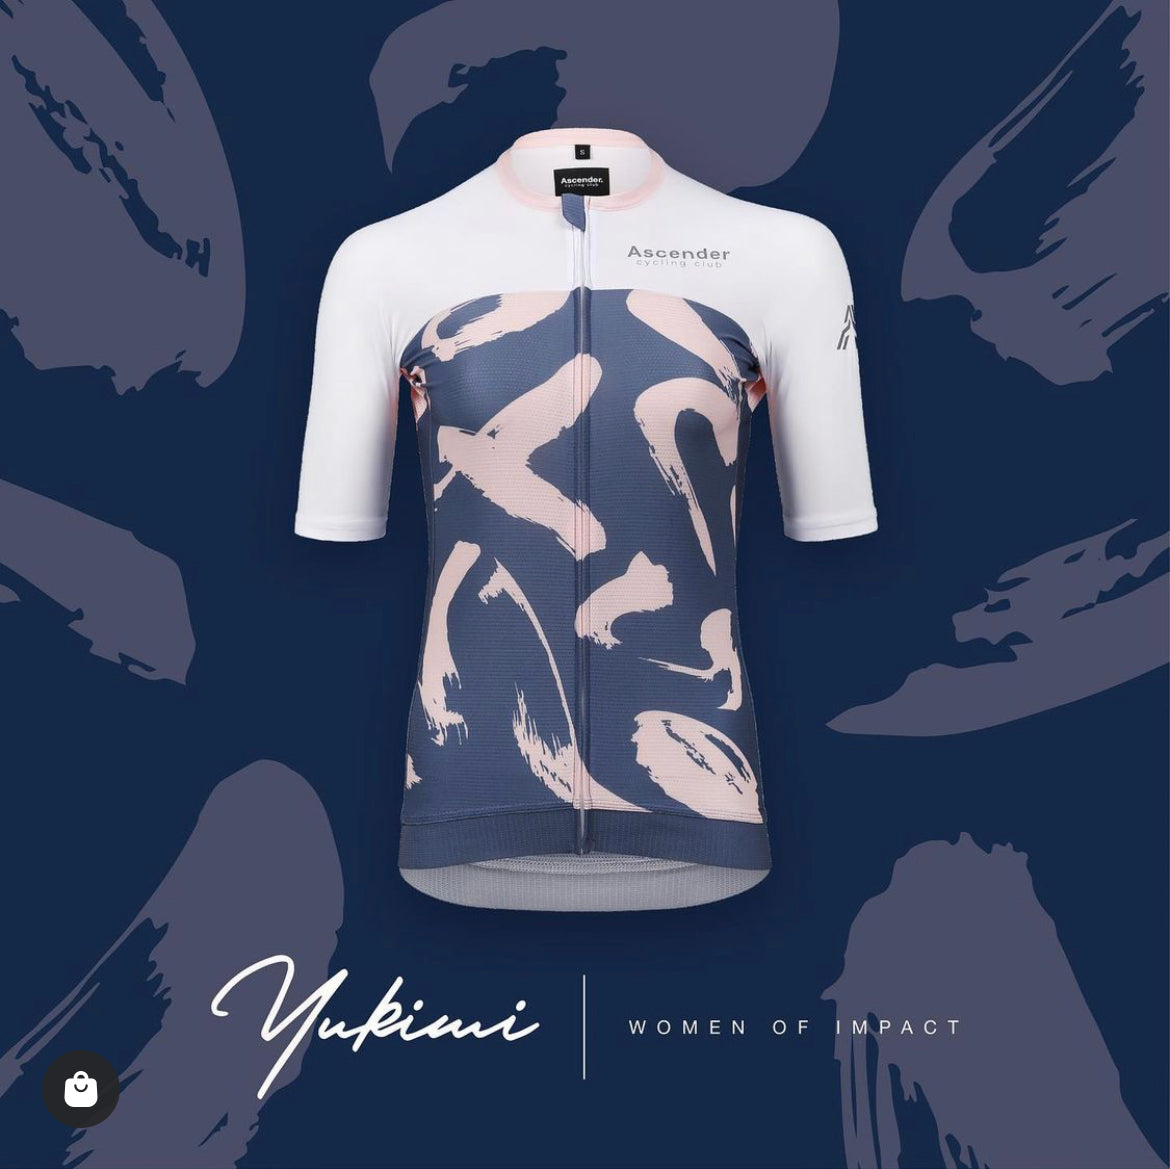 Yukimi Women Short Sleeves Jersey from Ascender Cycling Club in Zürich Switzerland Women Collection Instagram Presentation Front View